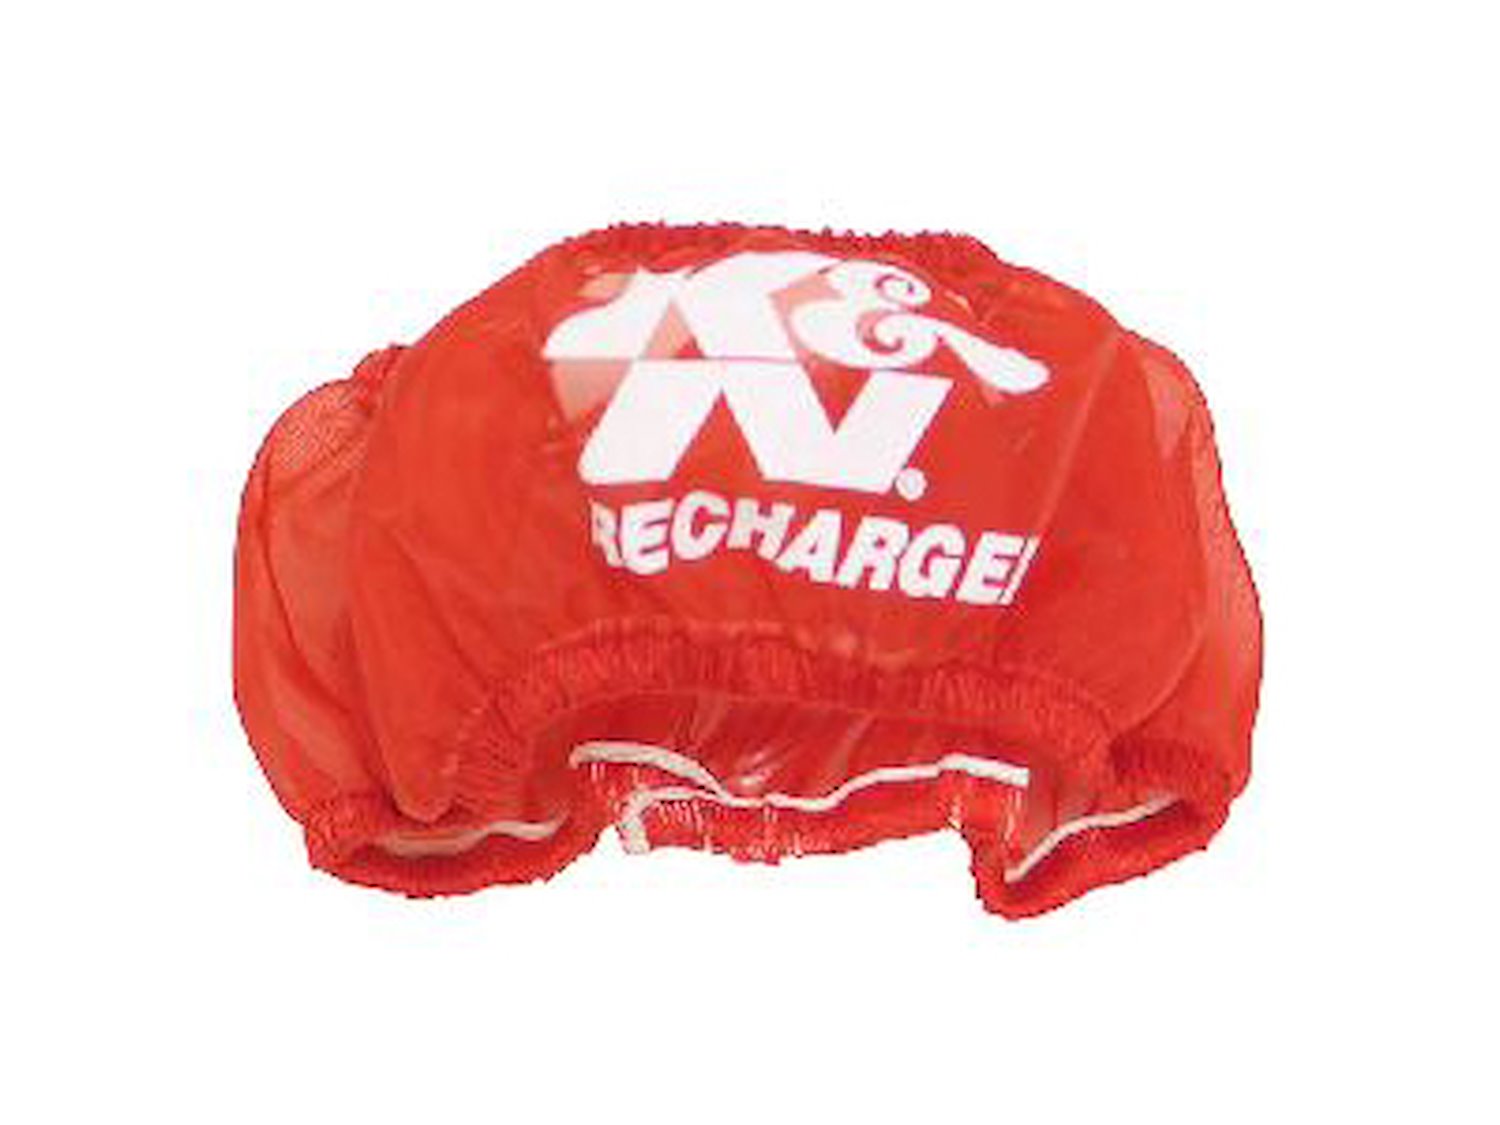 Round Straight Air Filter Wrap Wrap Type: Precharger